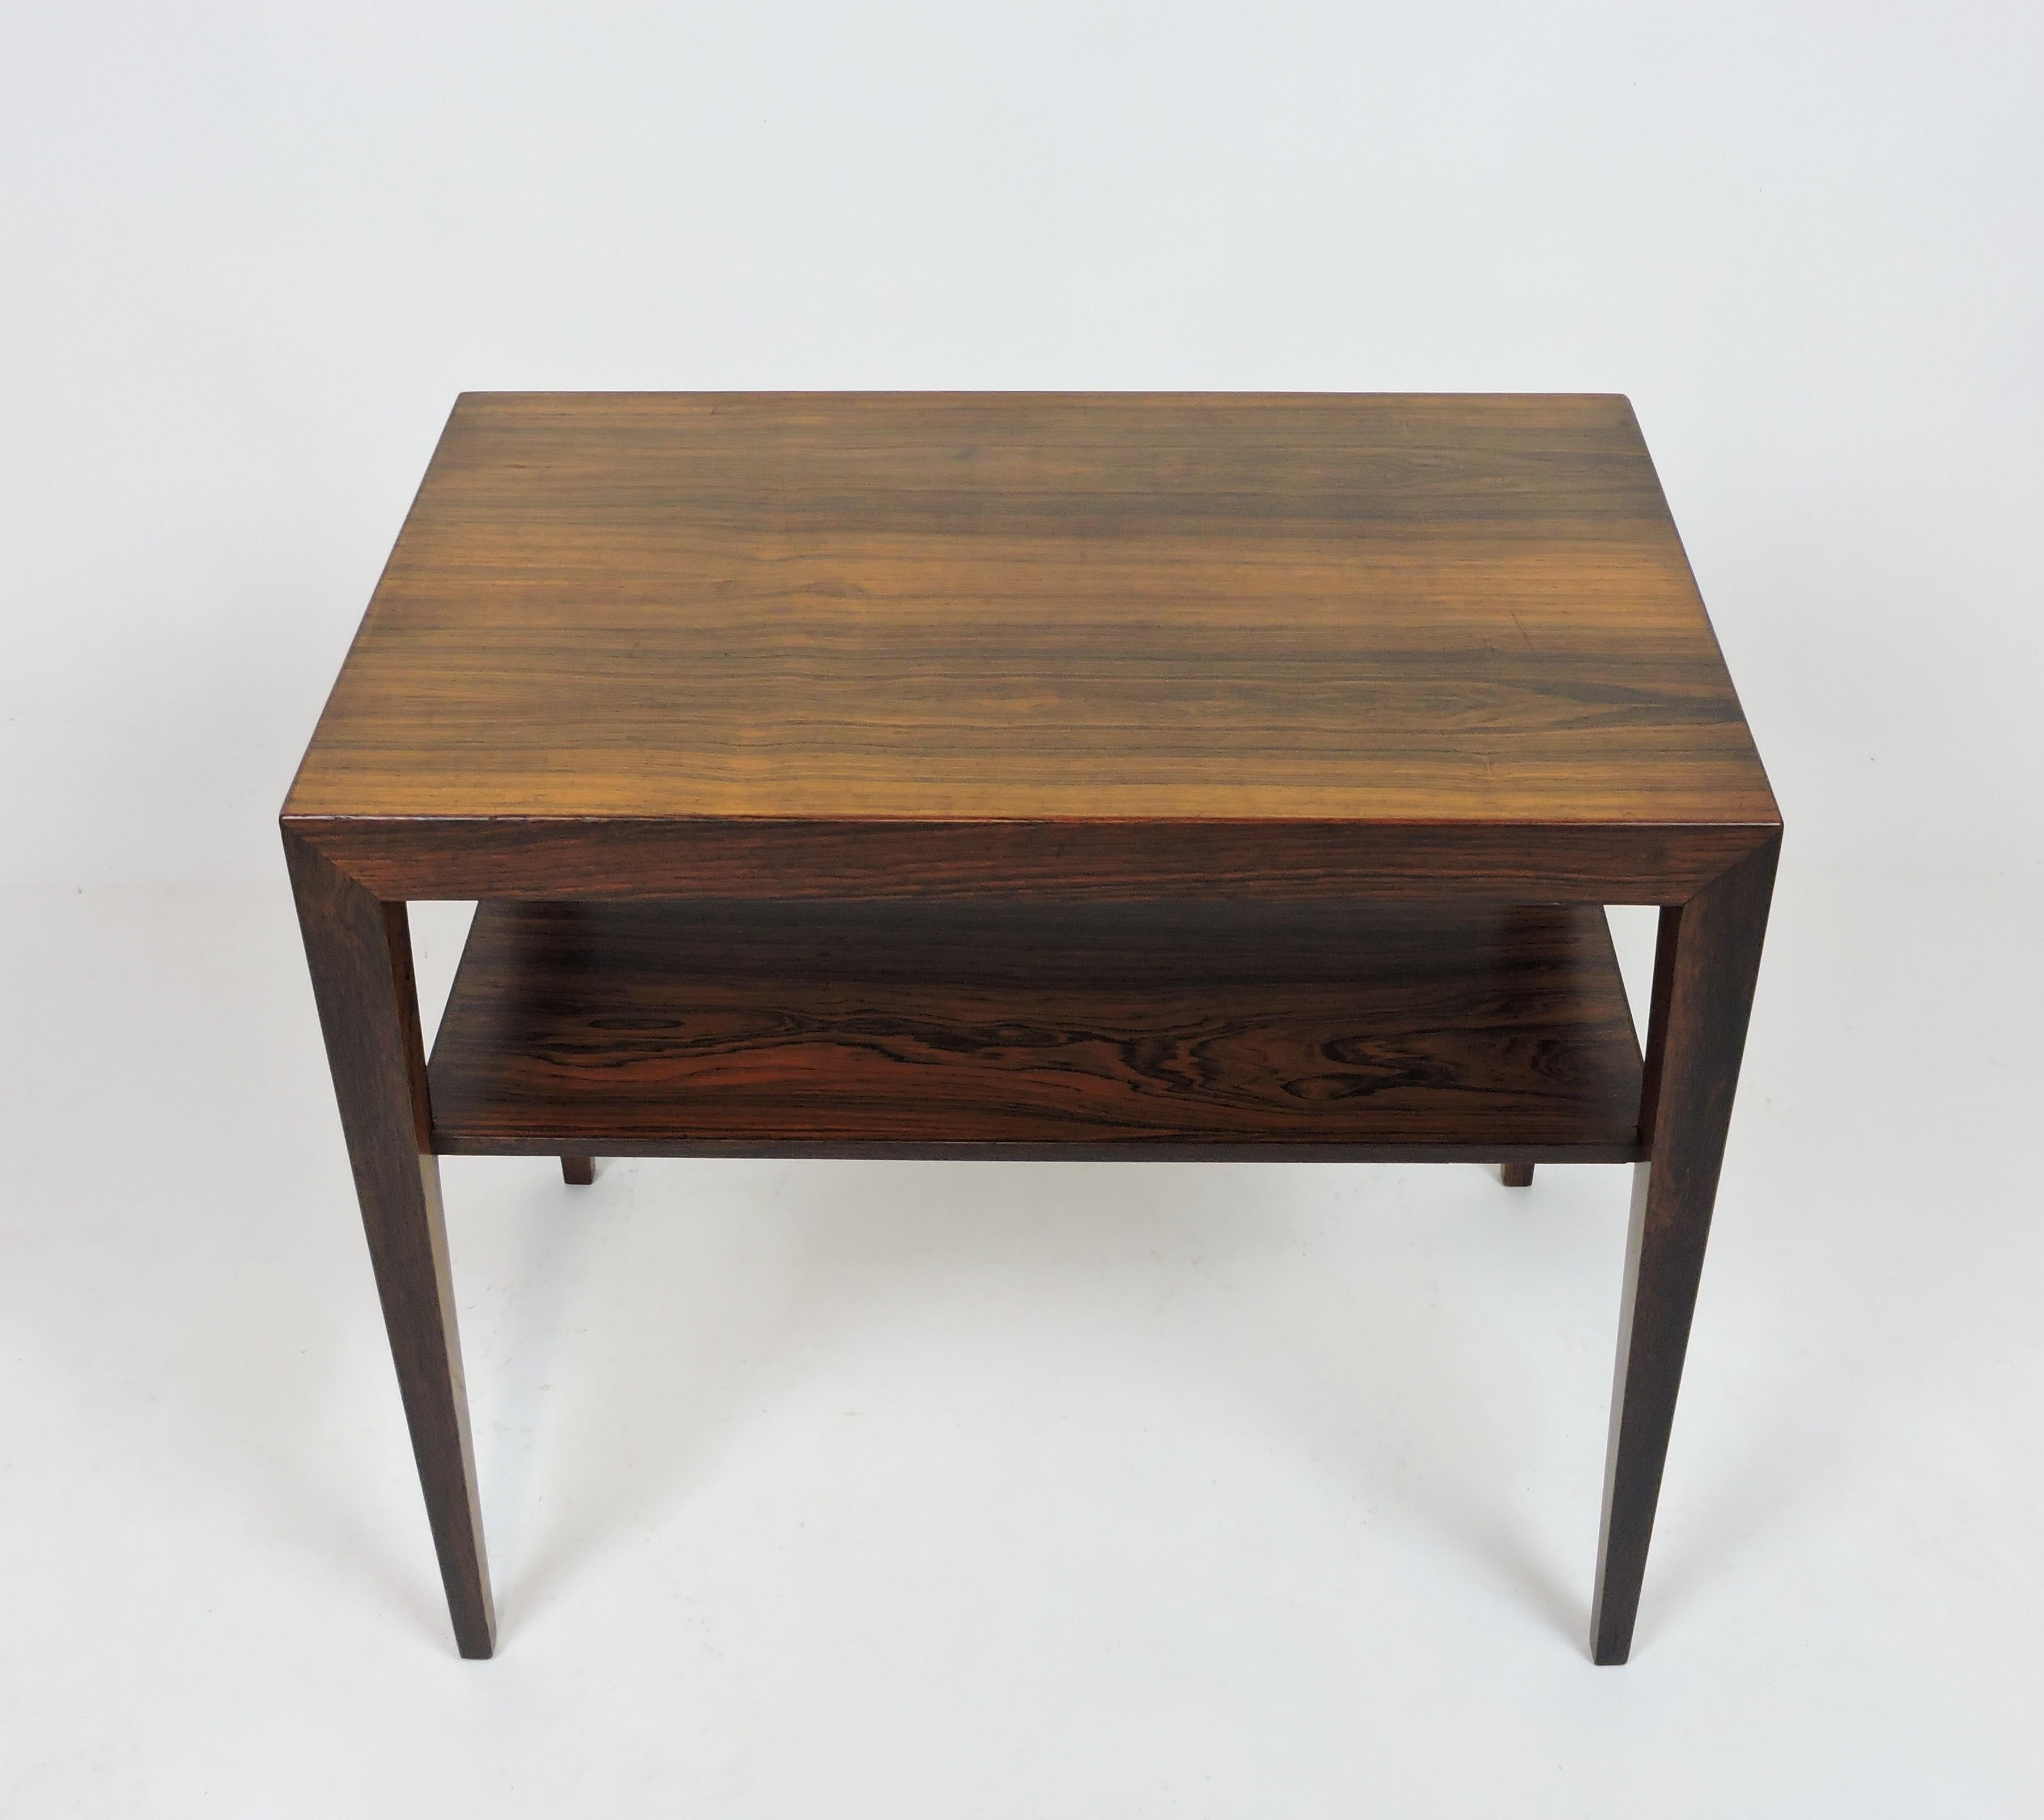 Elegant end or side table in rosewood designed by Severin Hansen and made in Denmark by Haslev Mobelsnedkeri. This well crafted table has a nicely proportioned minimalist design with tapered legs and includes a shelf. Marked with both Haslev